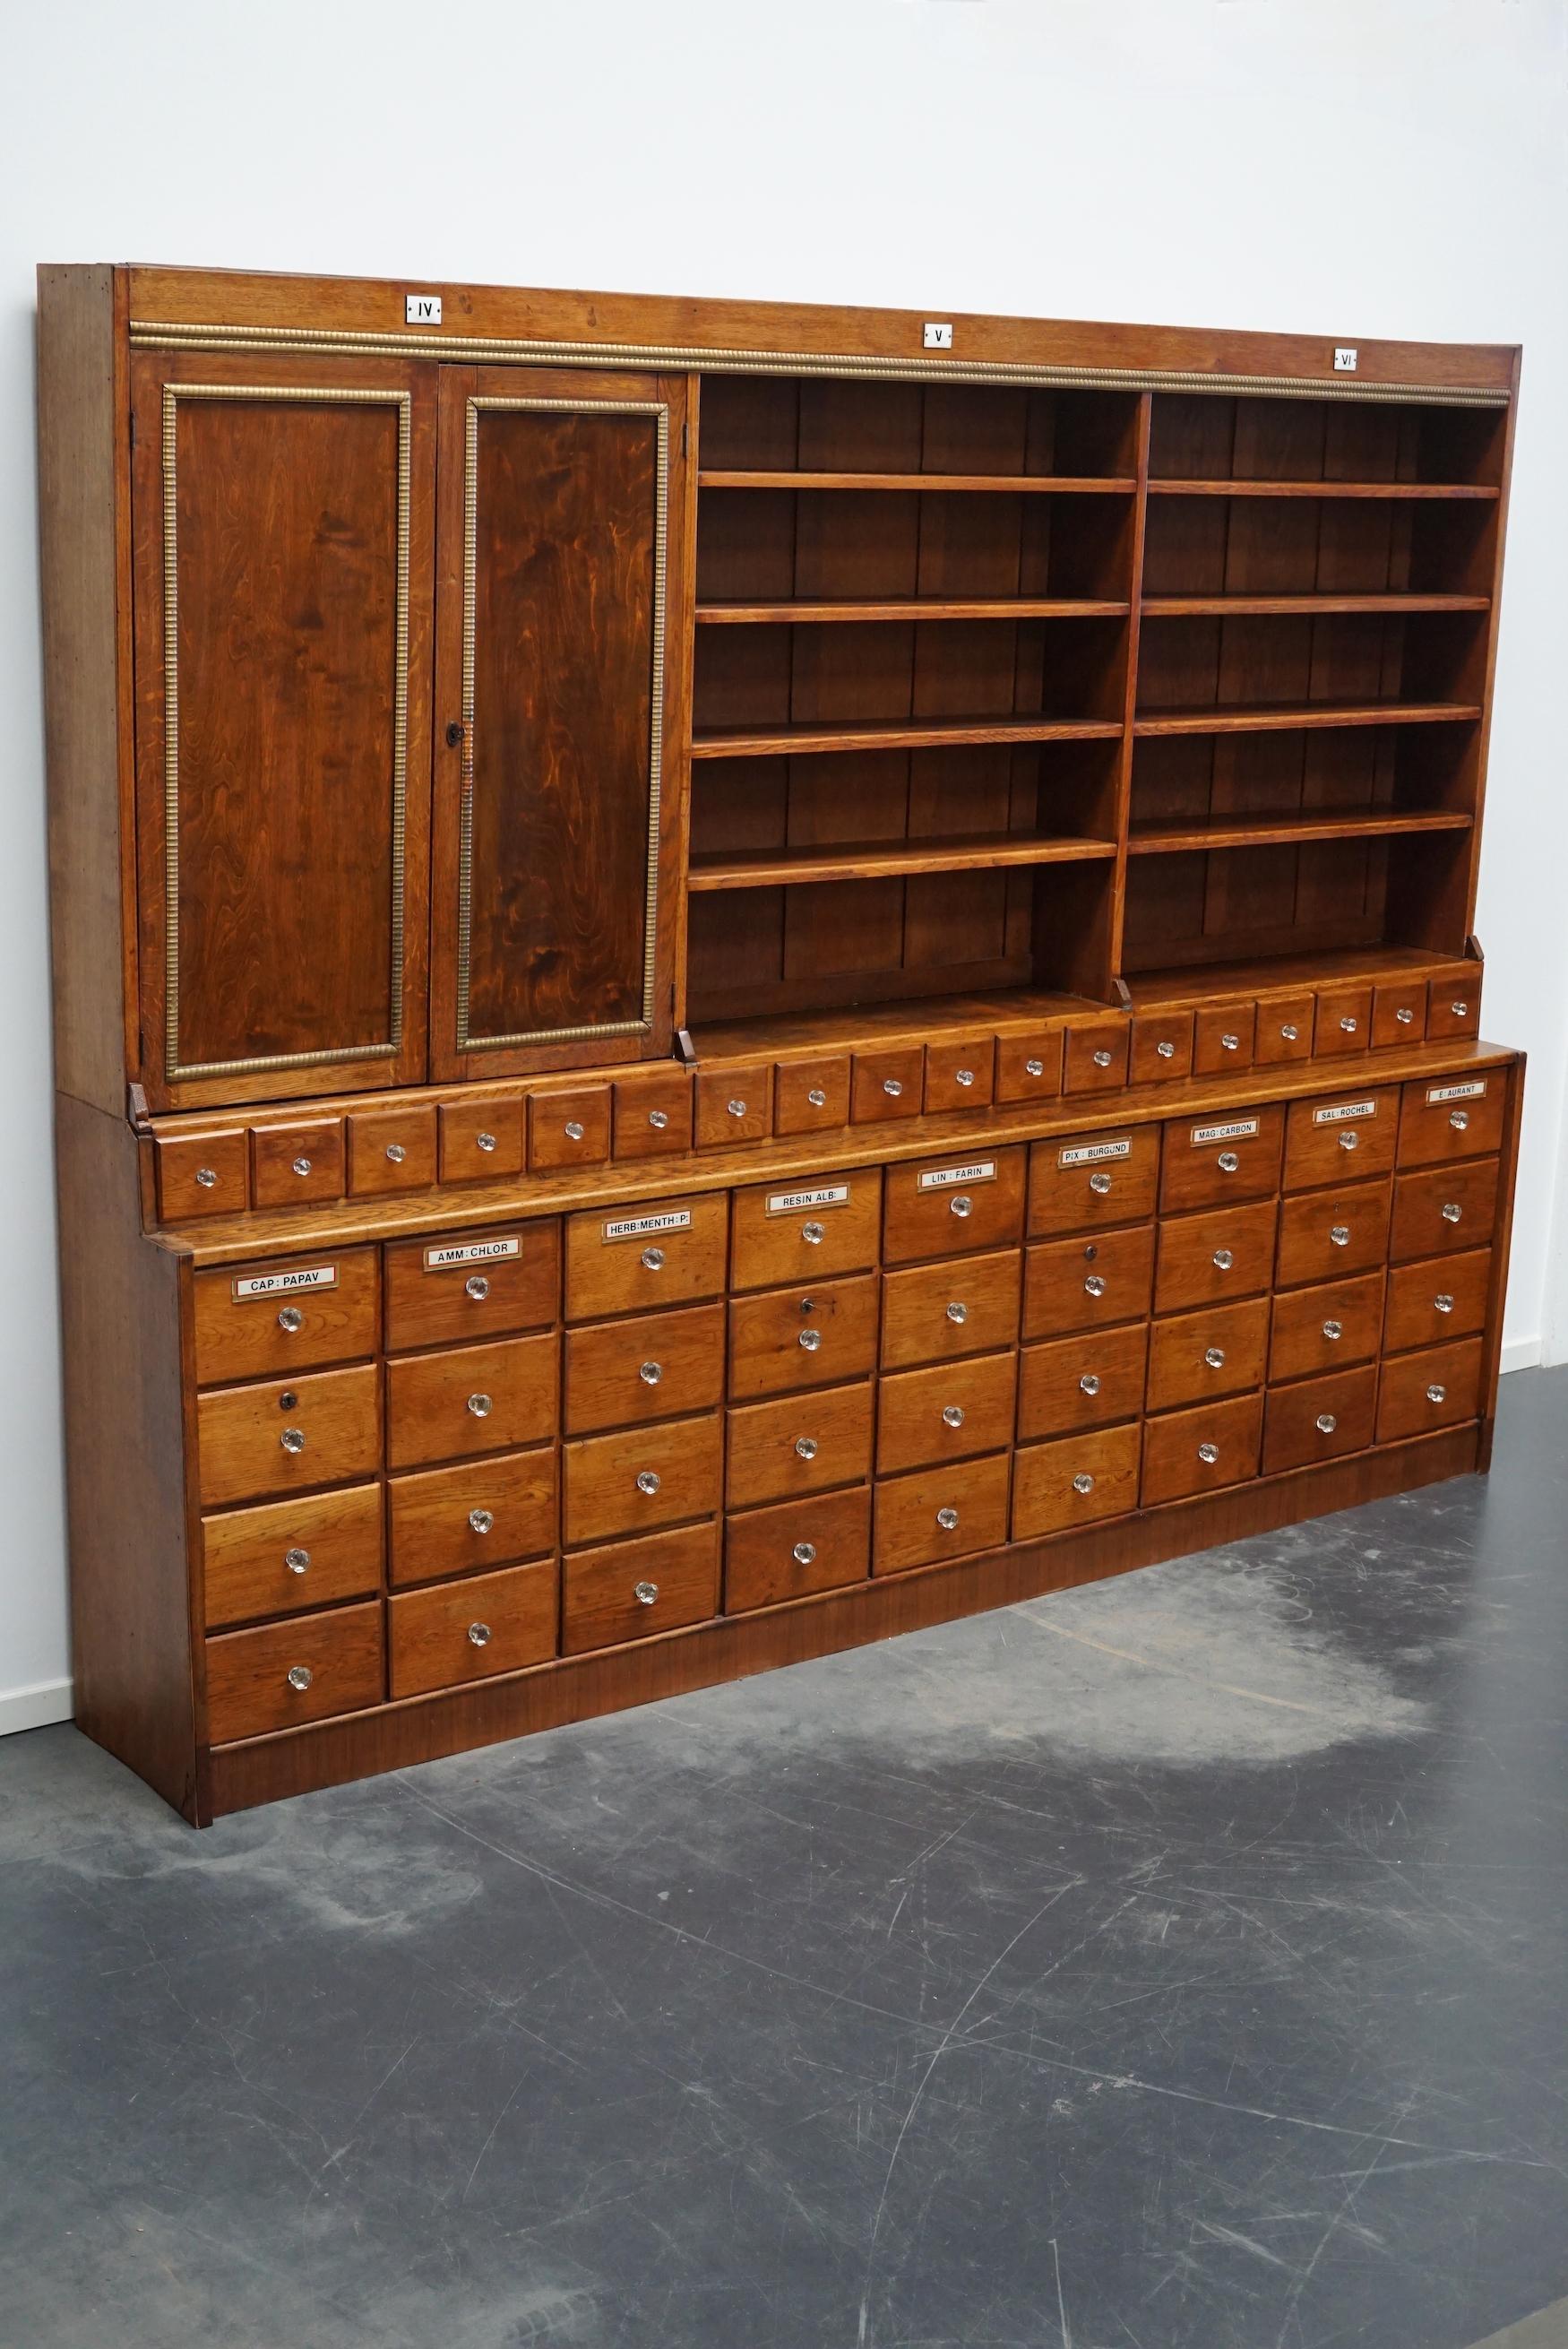 This apothecary cabinet was produced during the late 19th century in the United Kingdom. It features 36 large drawers and 18 small ones with glass knobs. The top cabinet has two doors and many shelves. The interior dimensions of the large drawers